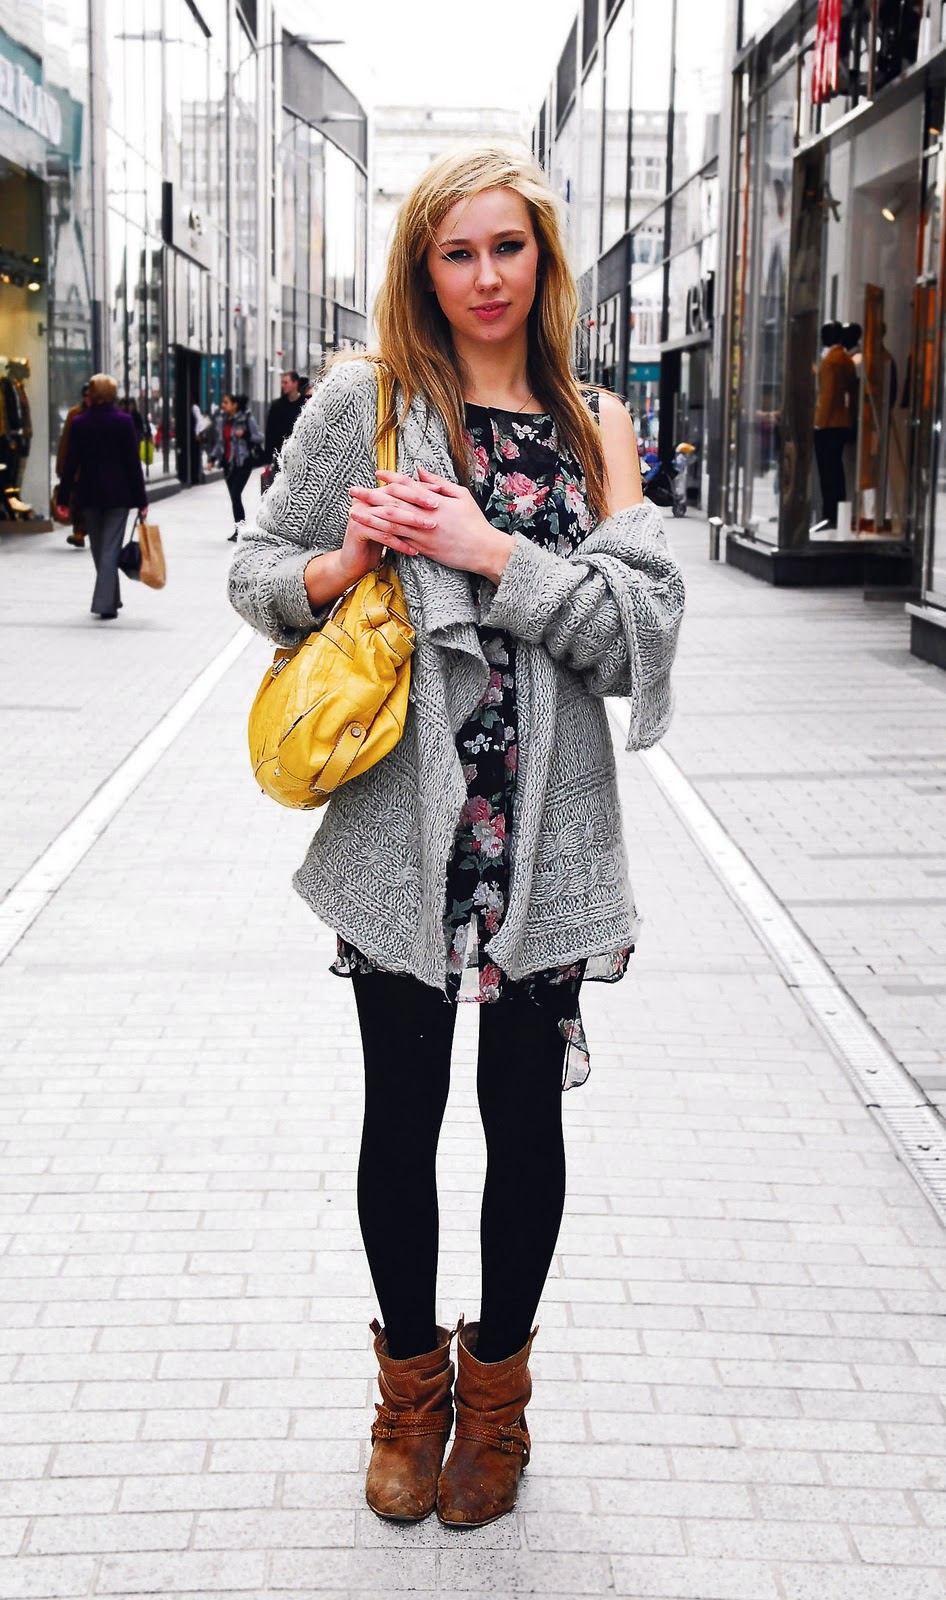 City Style: Cork | Style inspiration from the streets of the second city